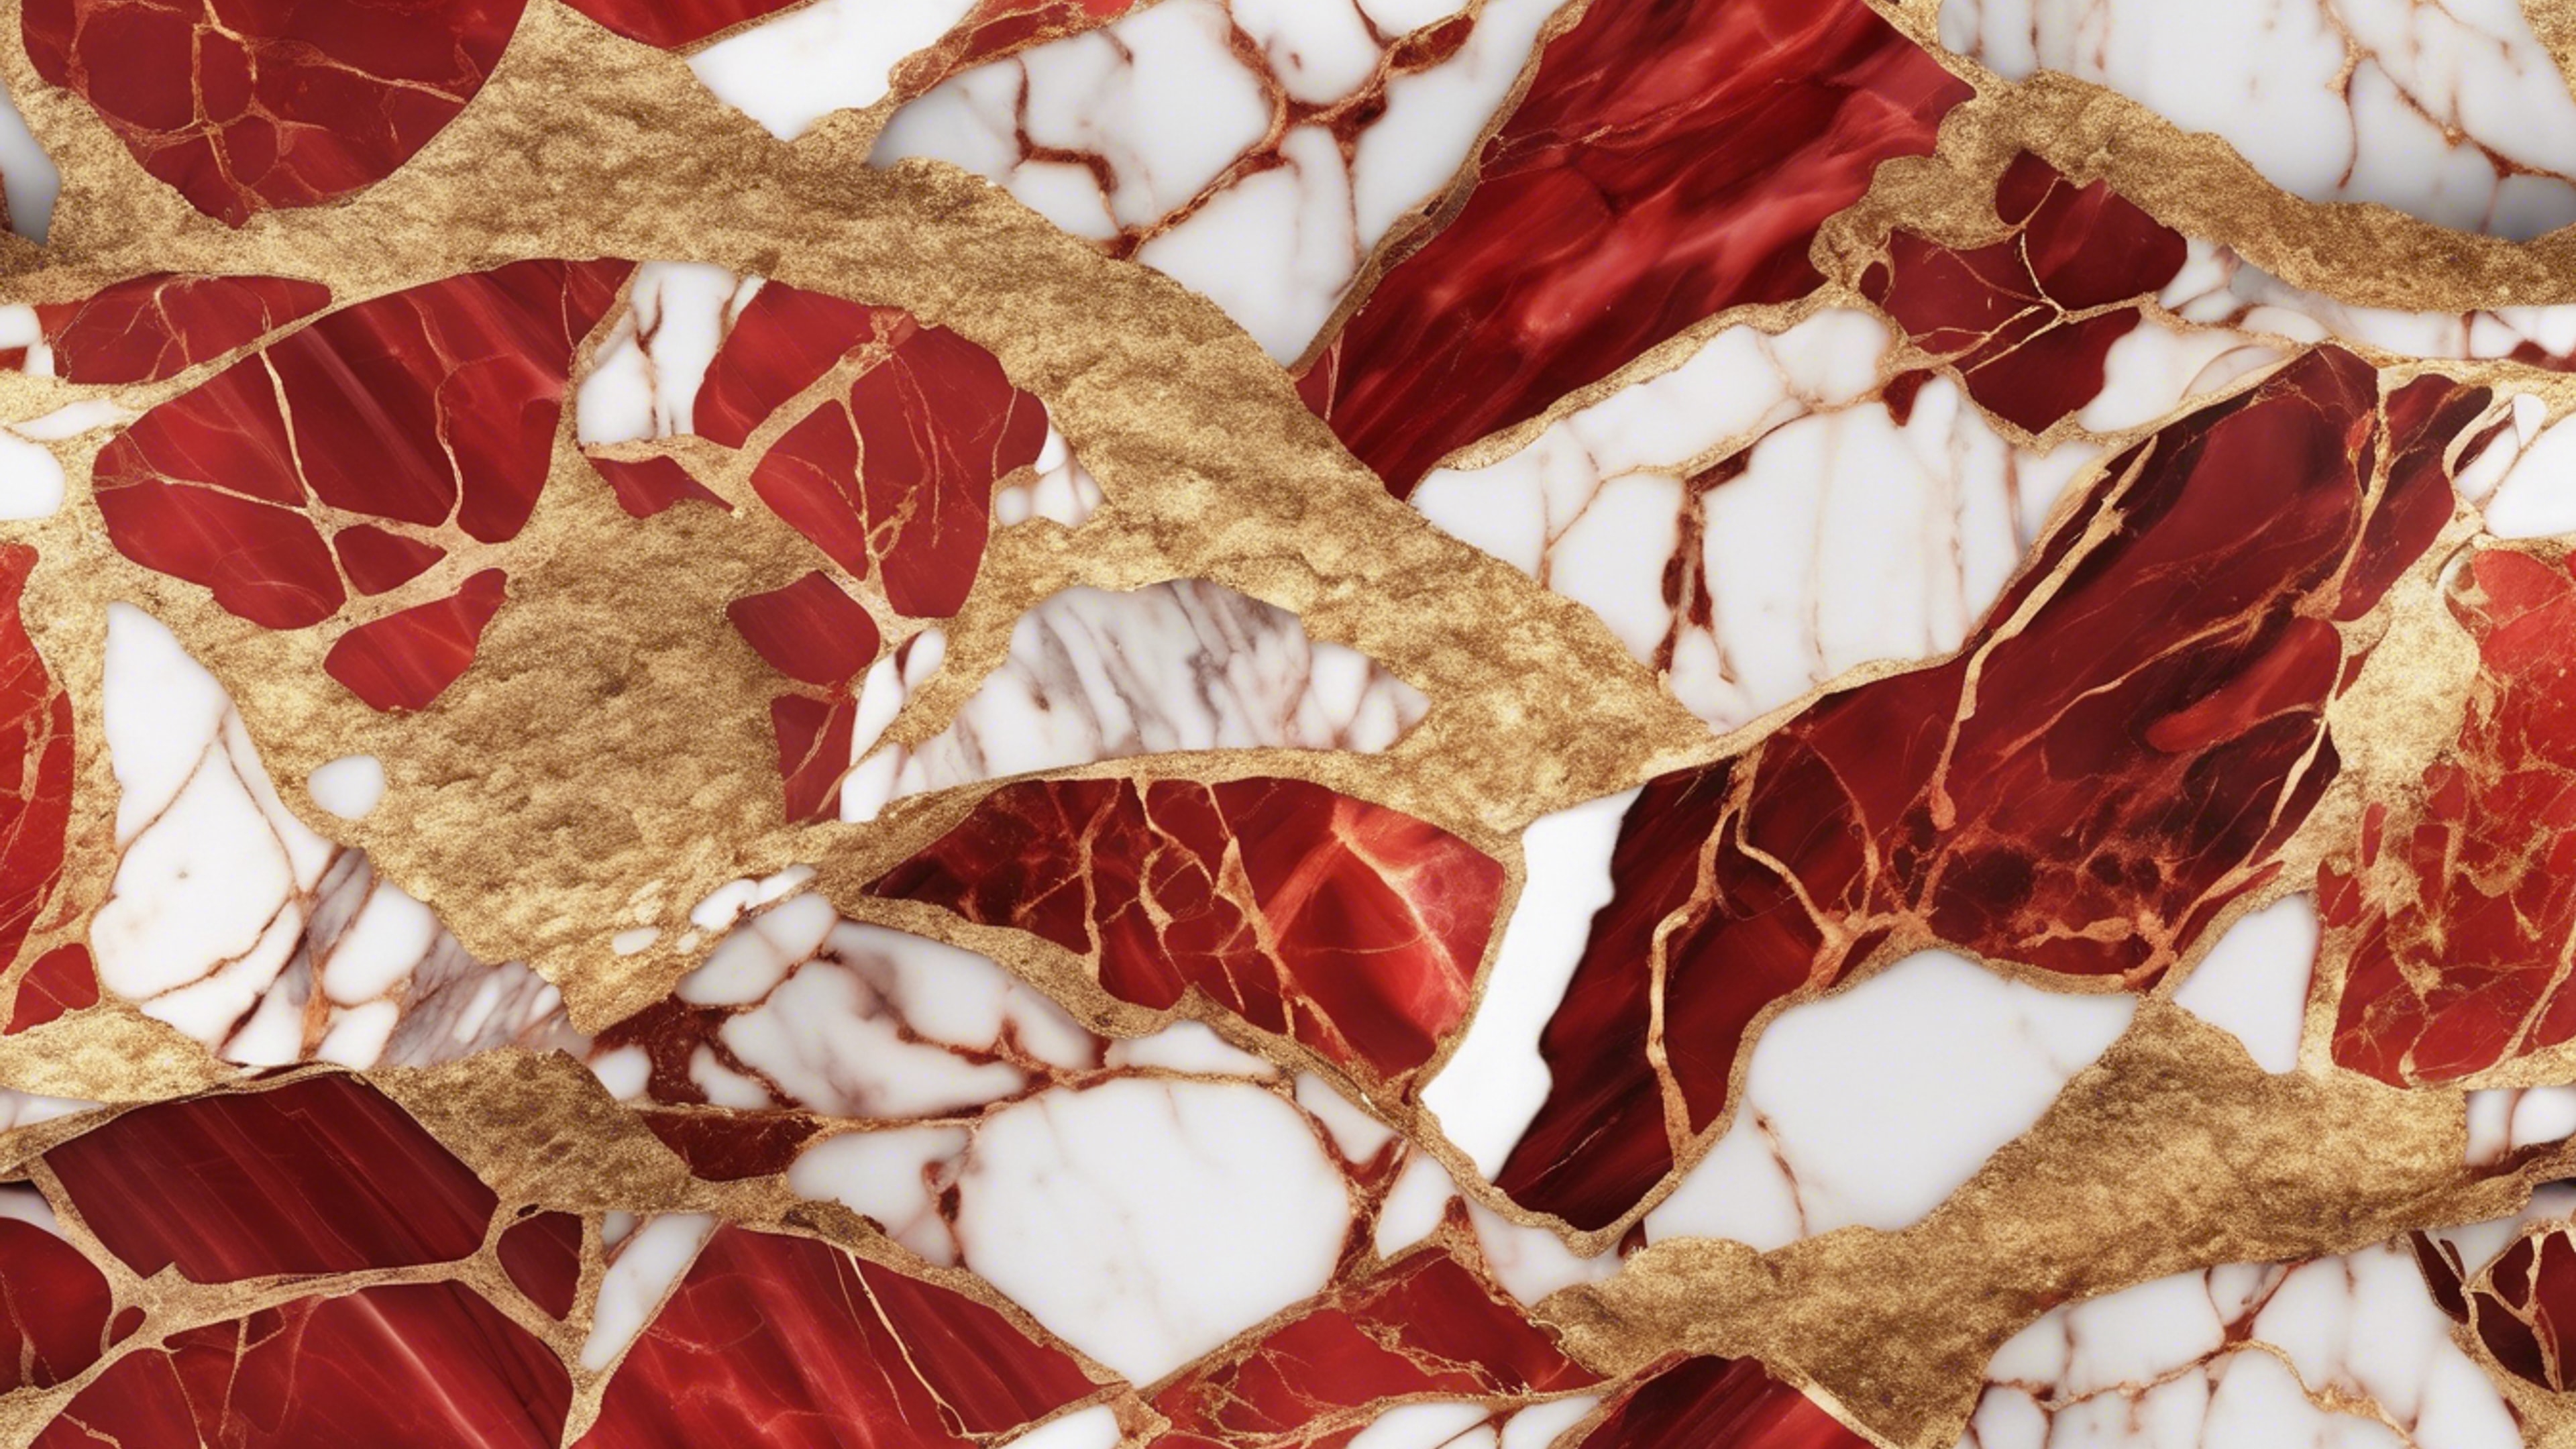 Seamless pattern of red and gold marble set that reflects an elegant aesthetic. Hintergrund[f027cacdf9b04c65aa51]